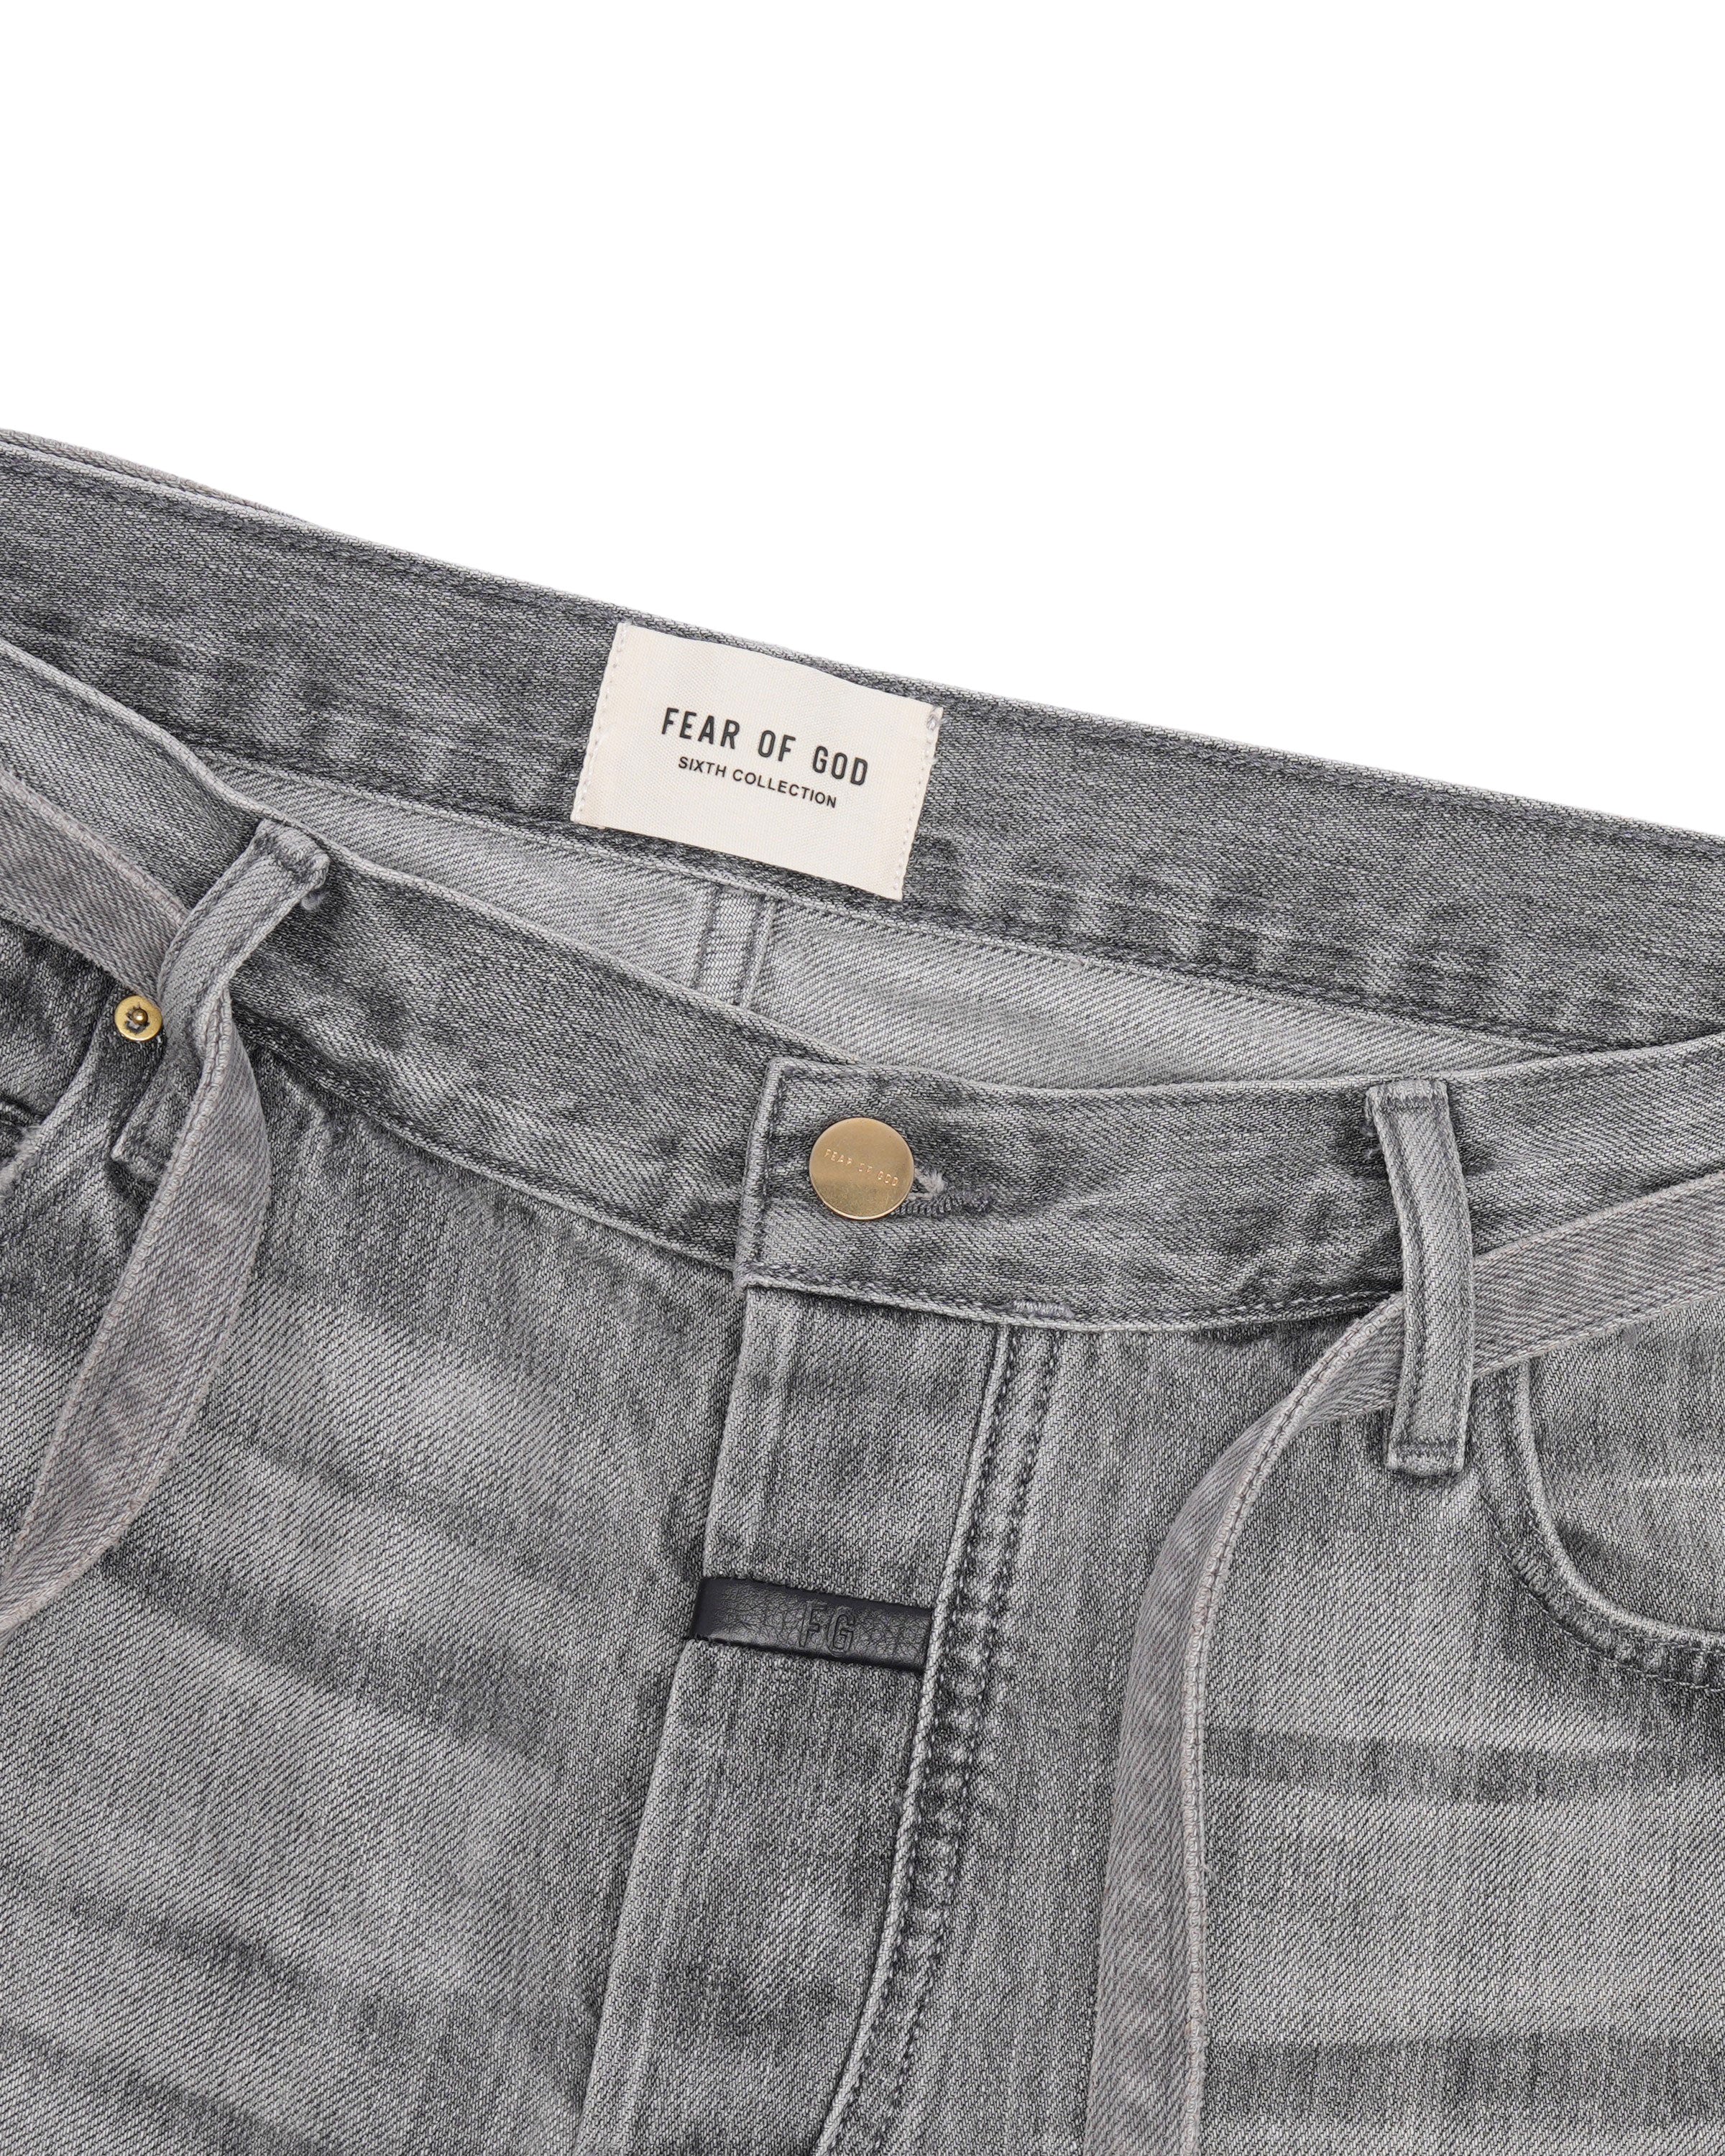 Sixth Collection Belted Jeans